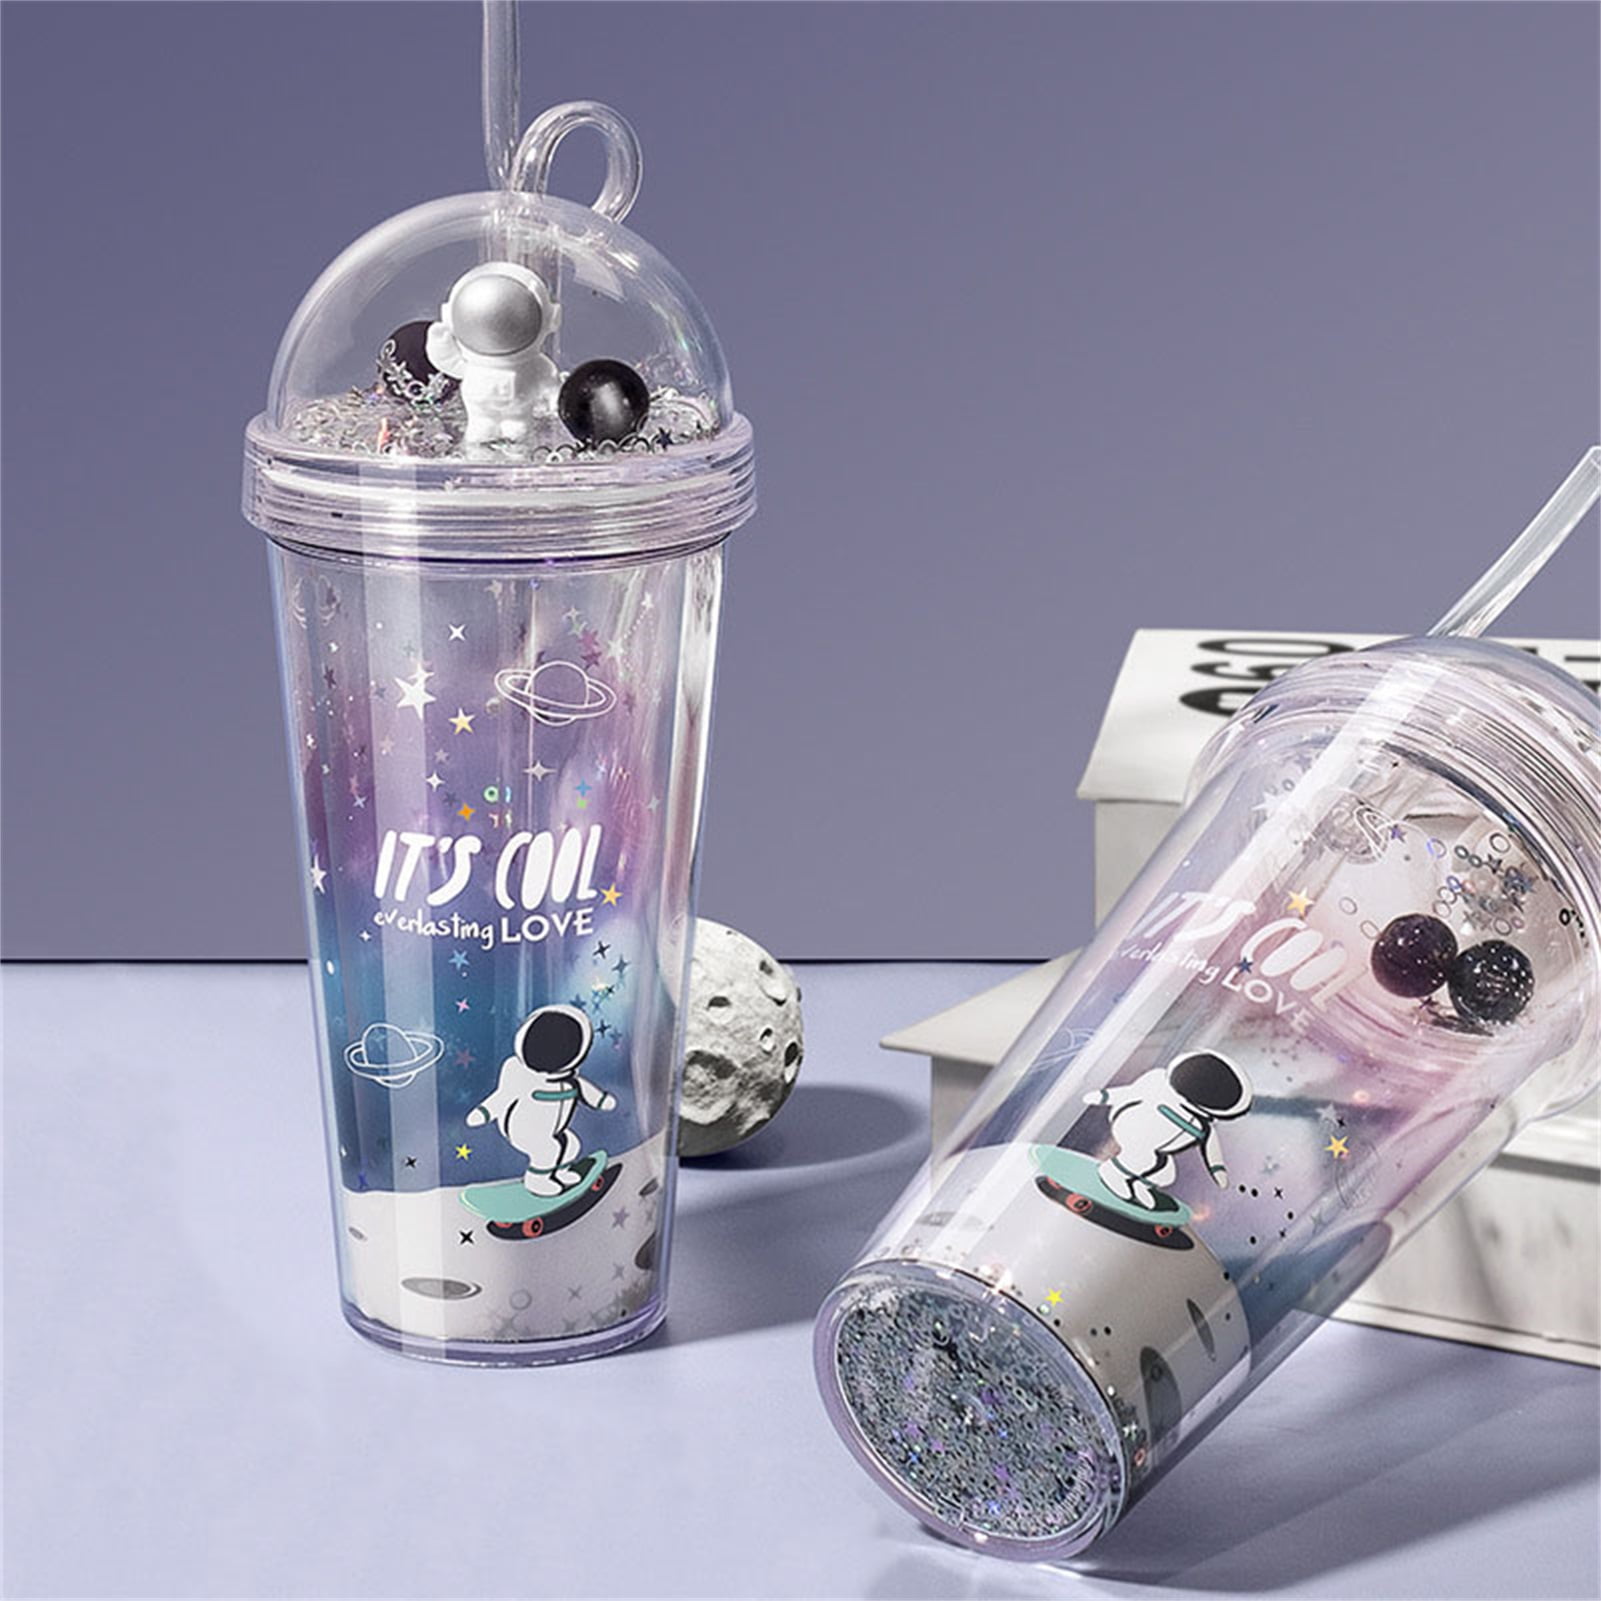 I Need Space Glitter Tumbler with Straw – The Blessed Nest